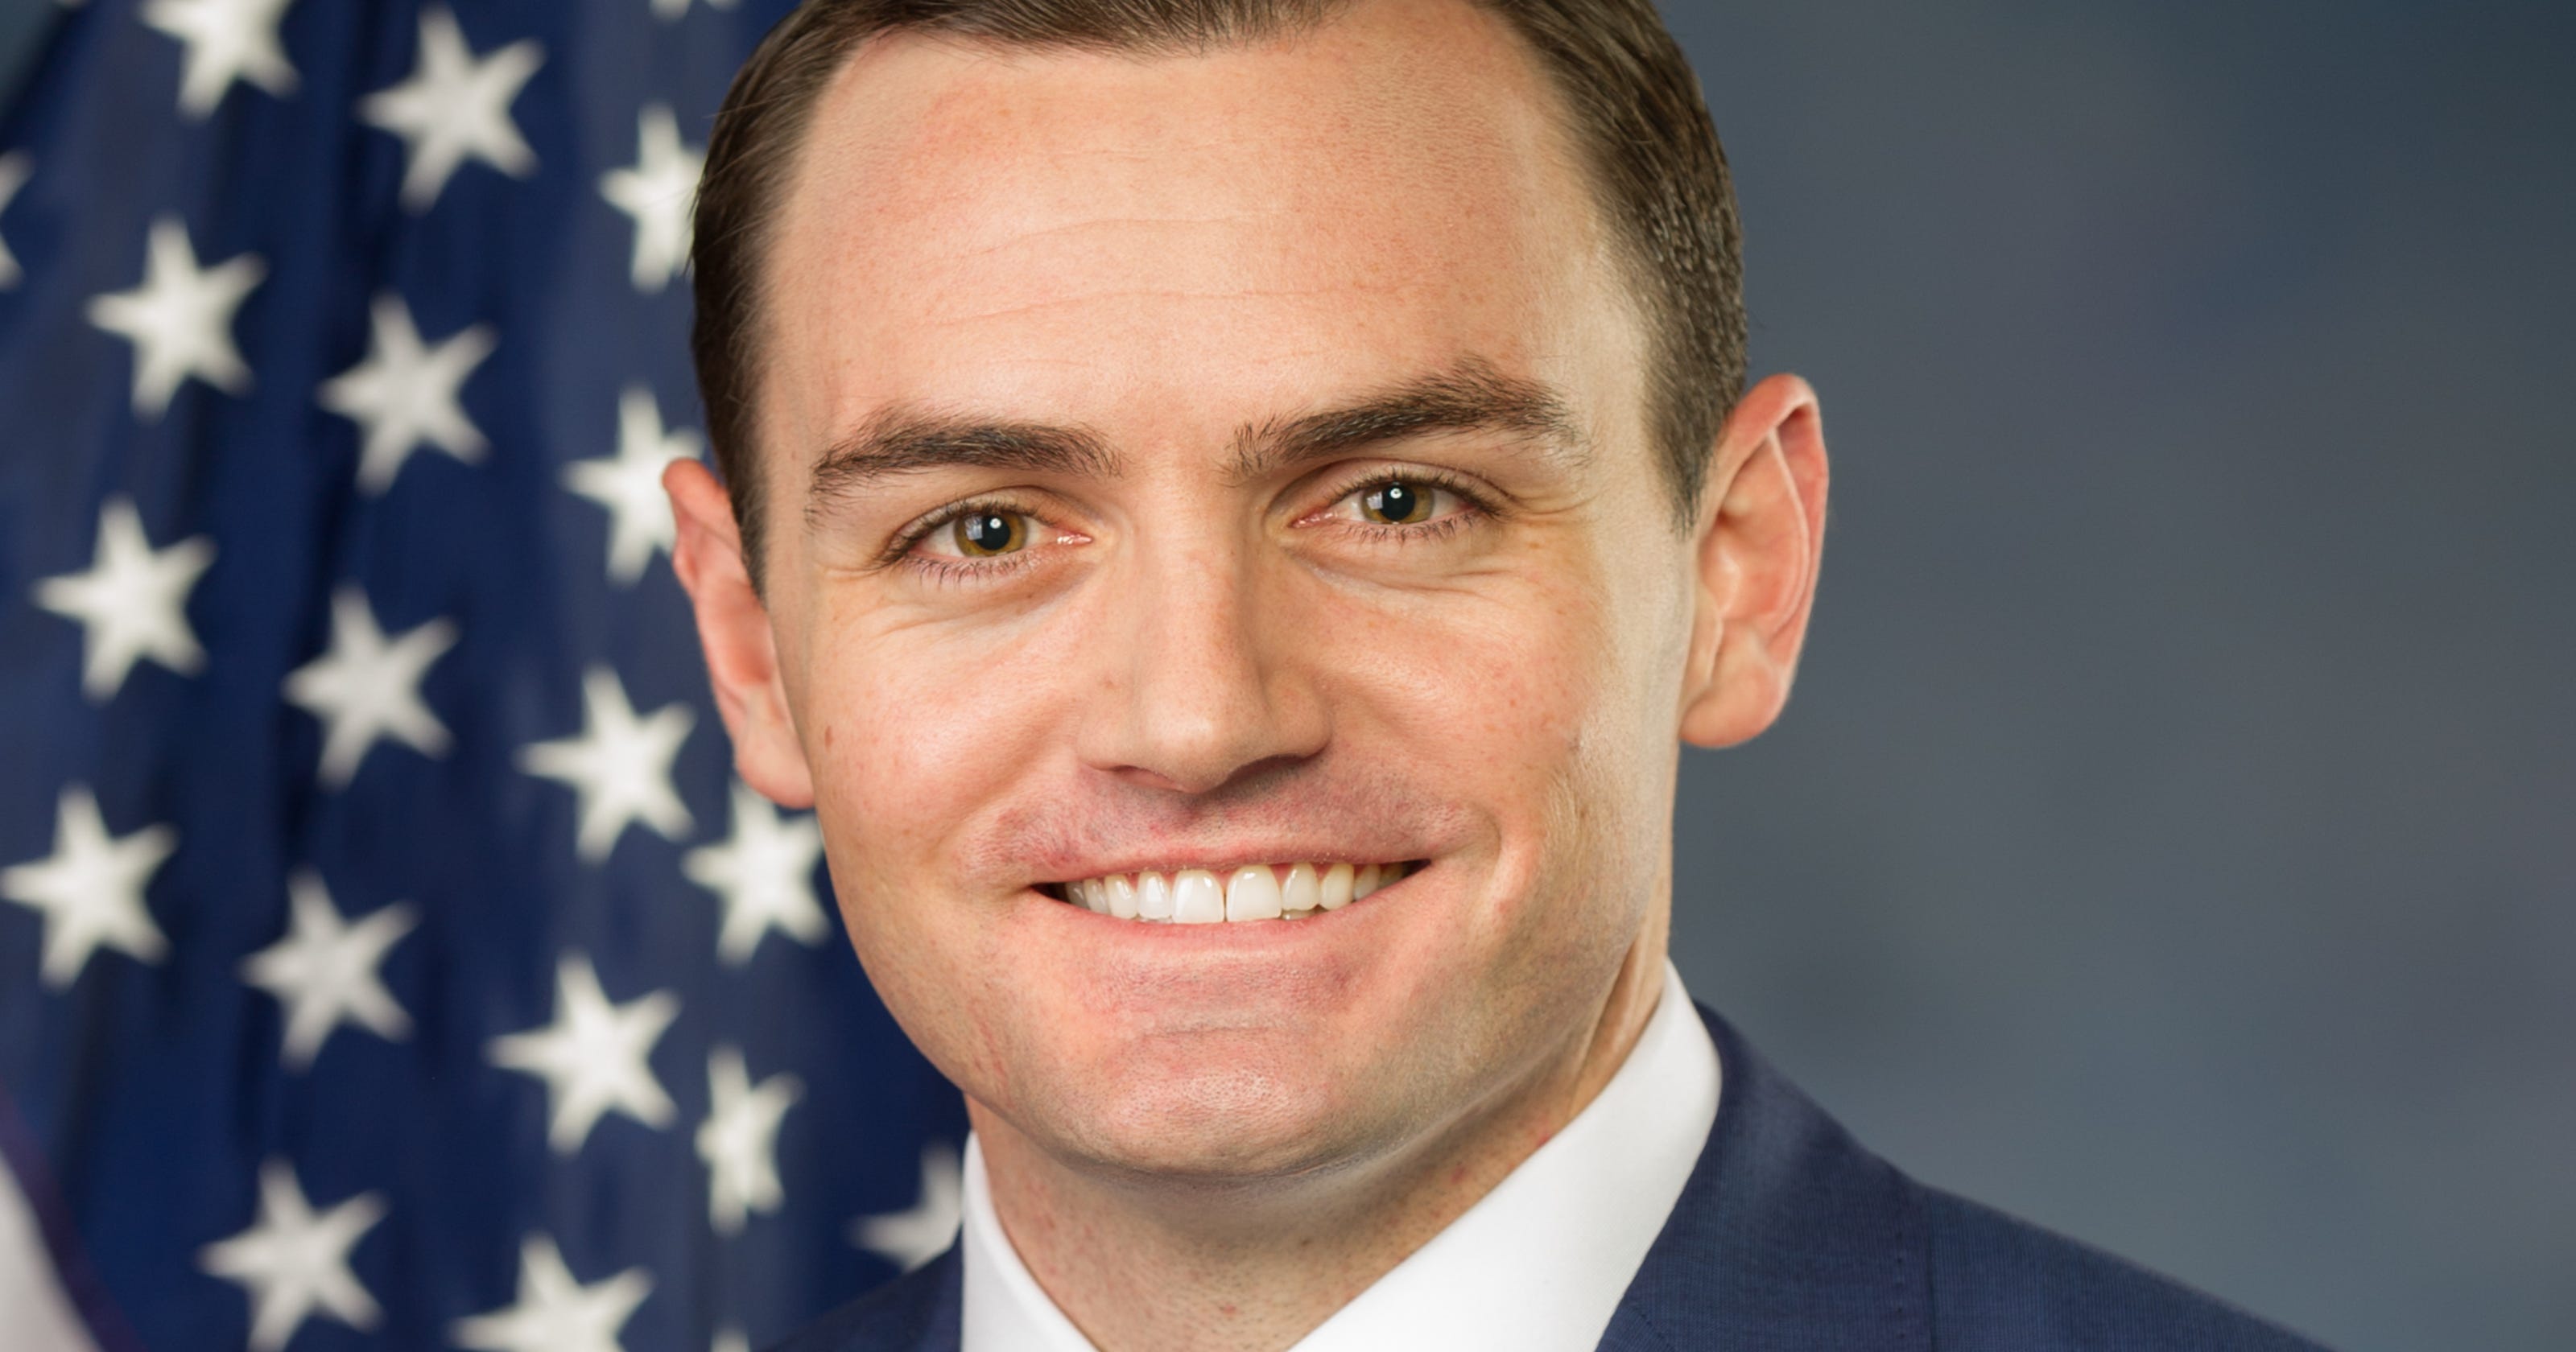 Rep. Mike Gallagher advocates for stronger Congress, border security